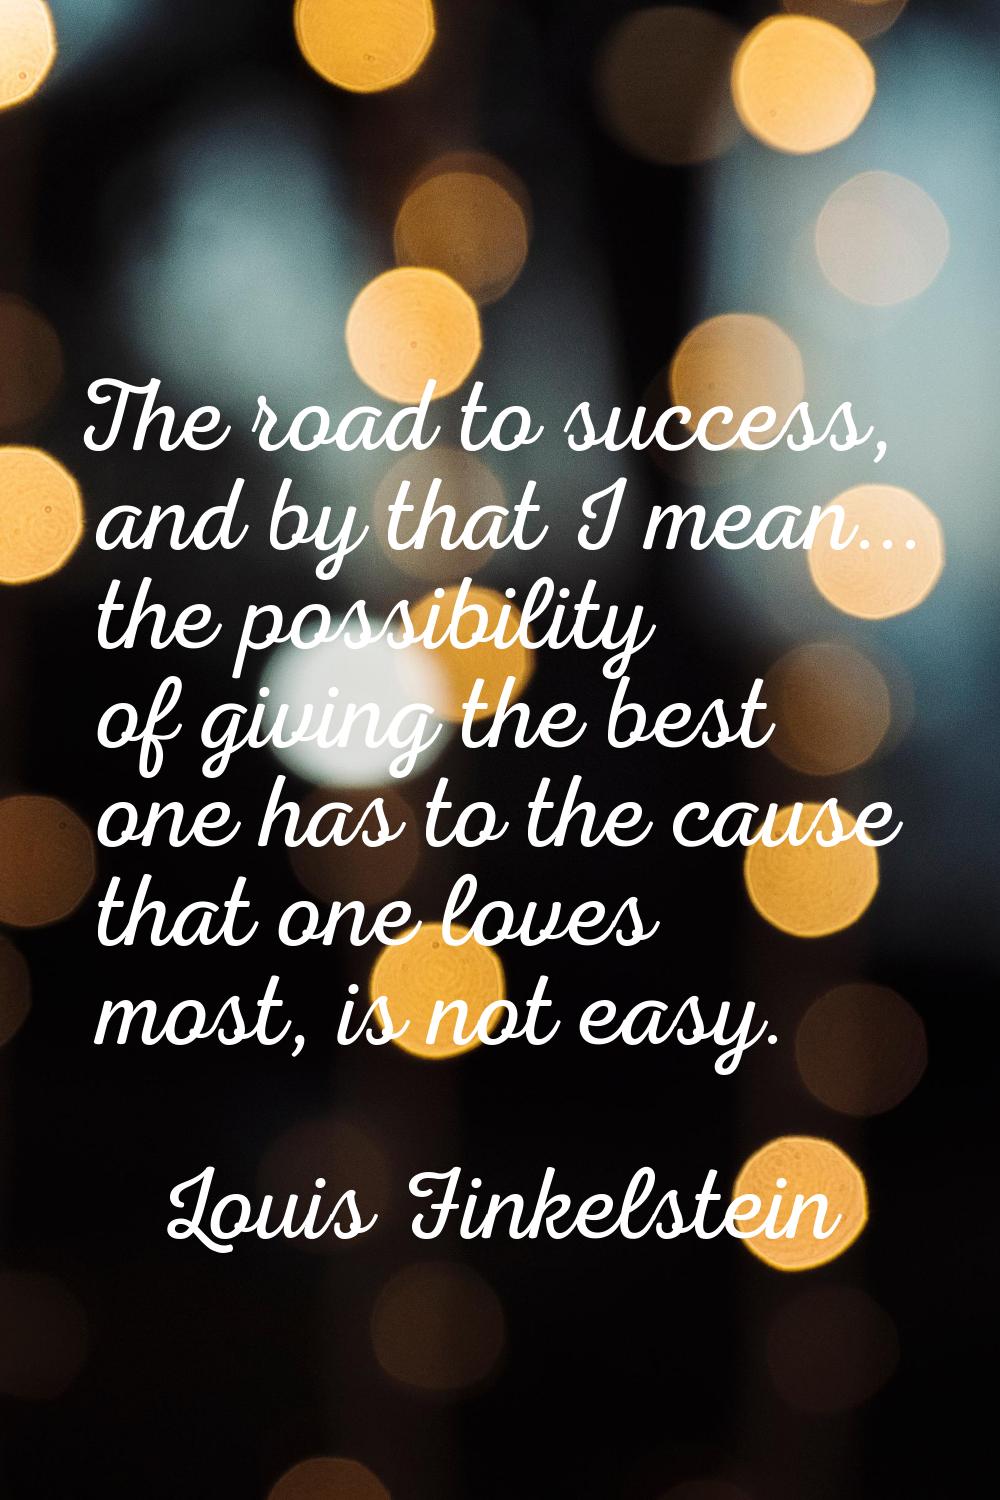 The road to success, and by that I mean... the possibility of giving the best one has to the cause 